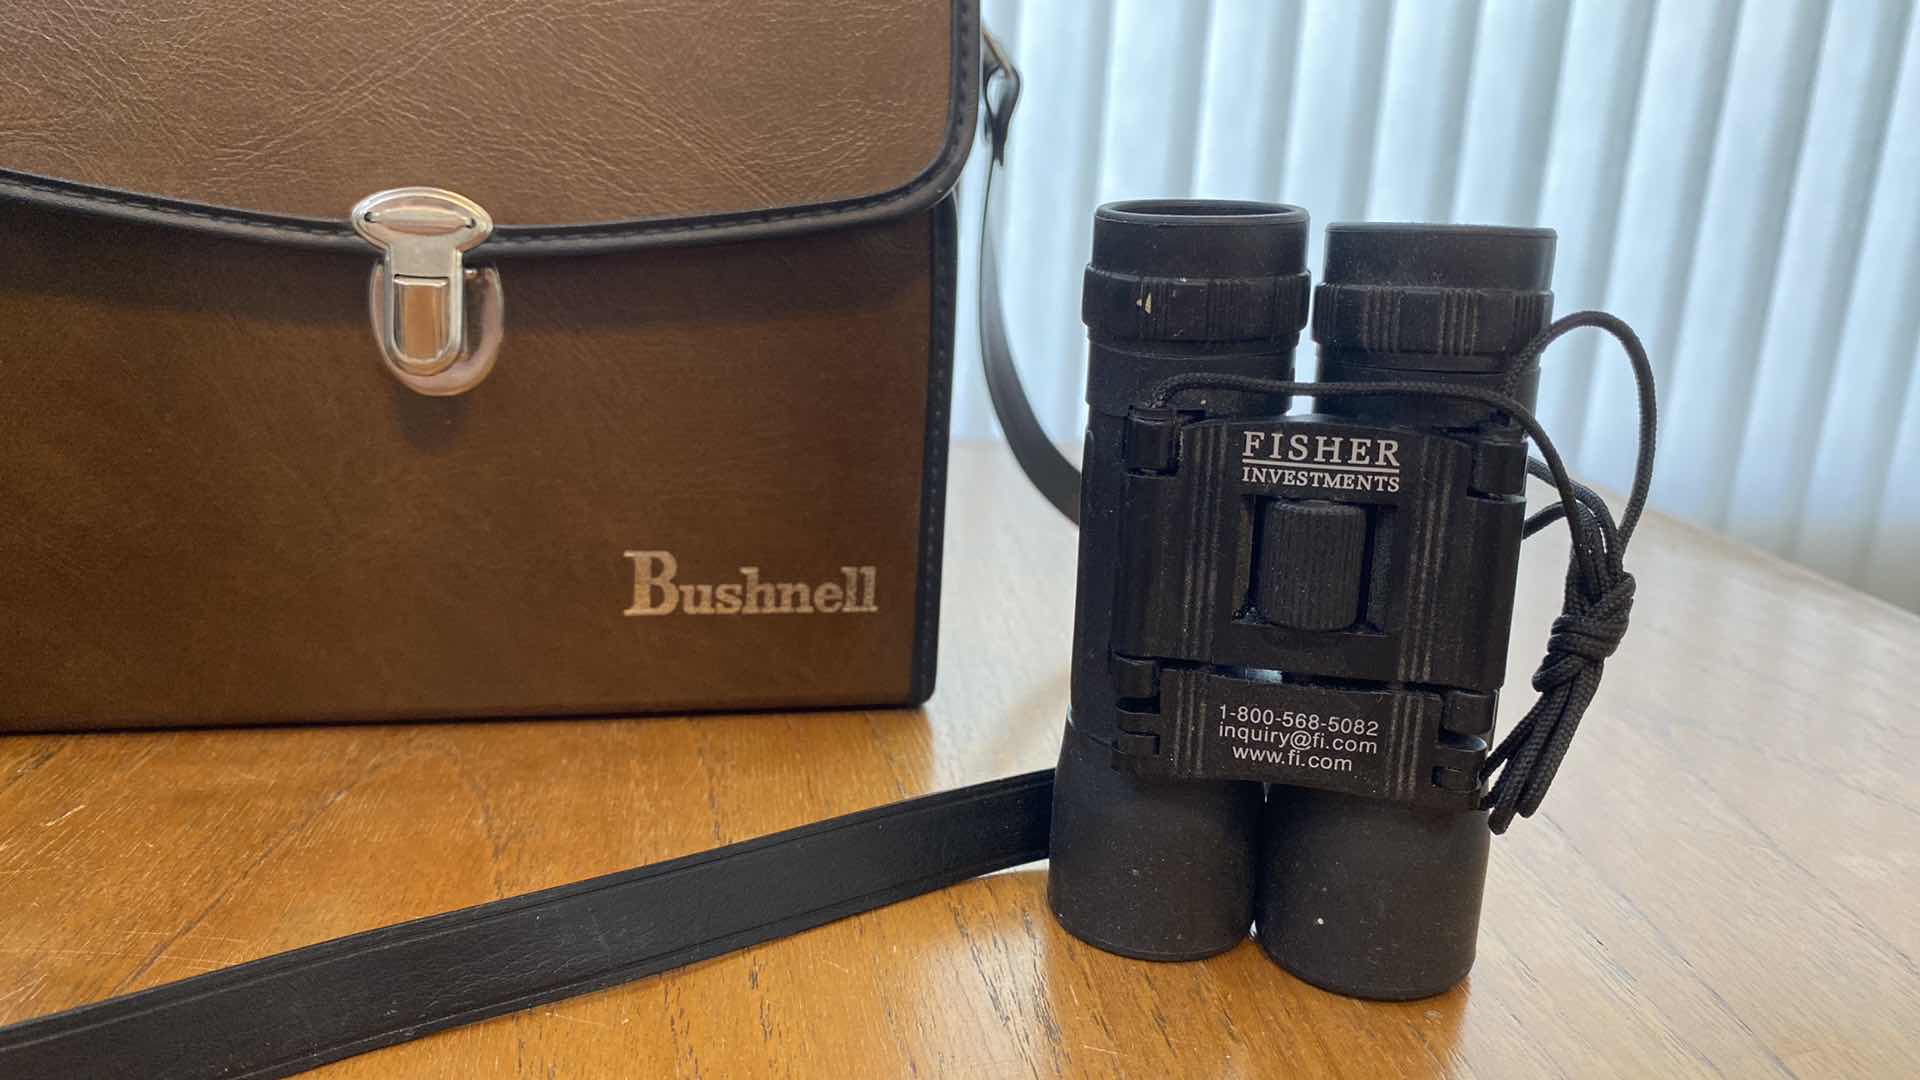 Photo 4 of BUSHNELL BINOCULARS AND MORE